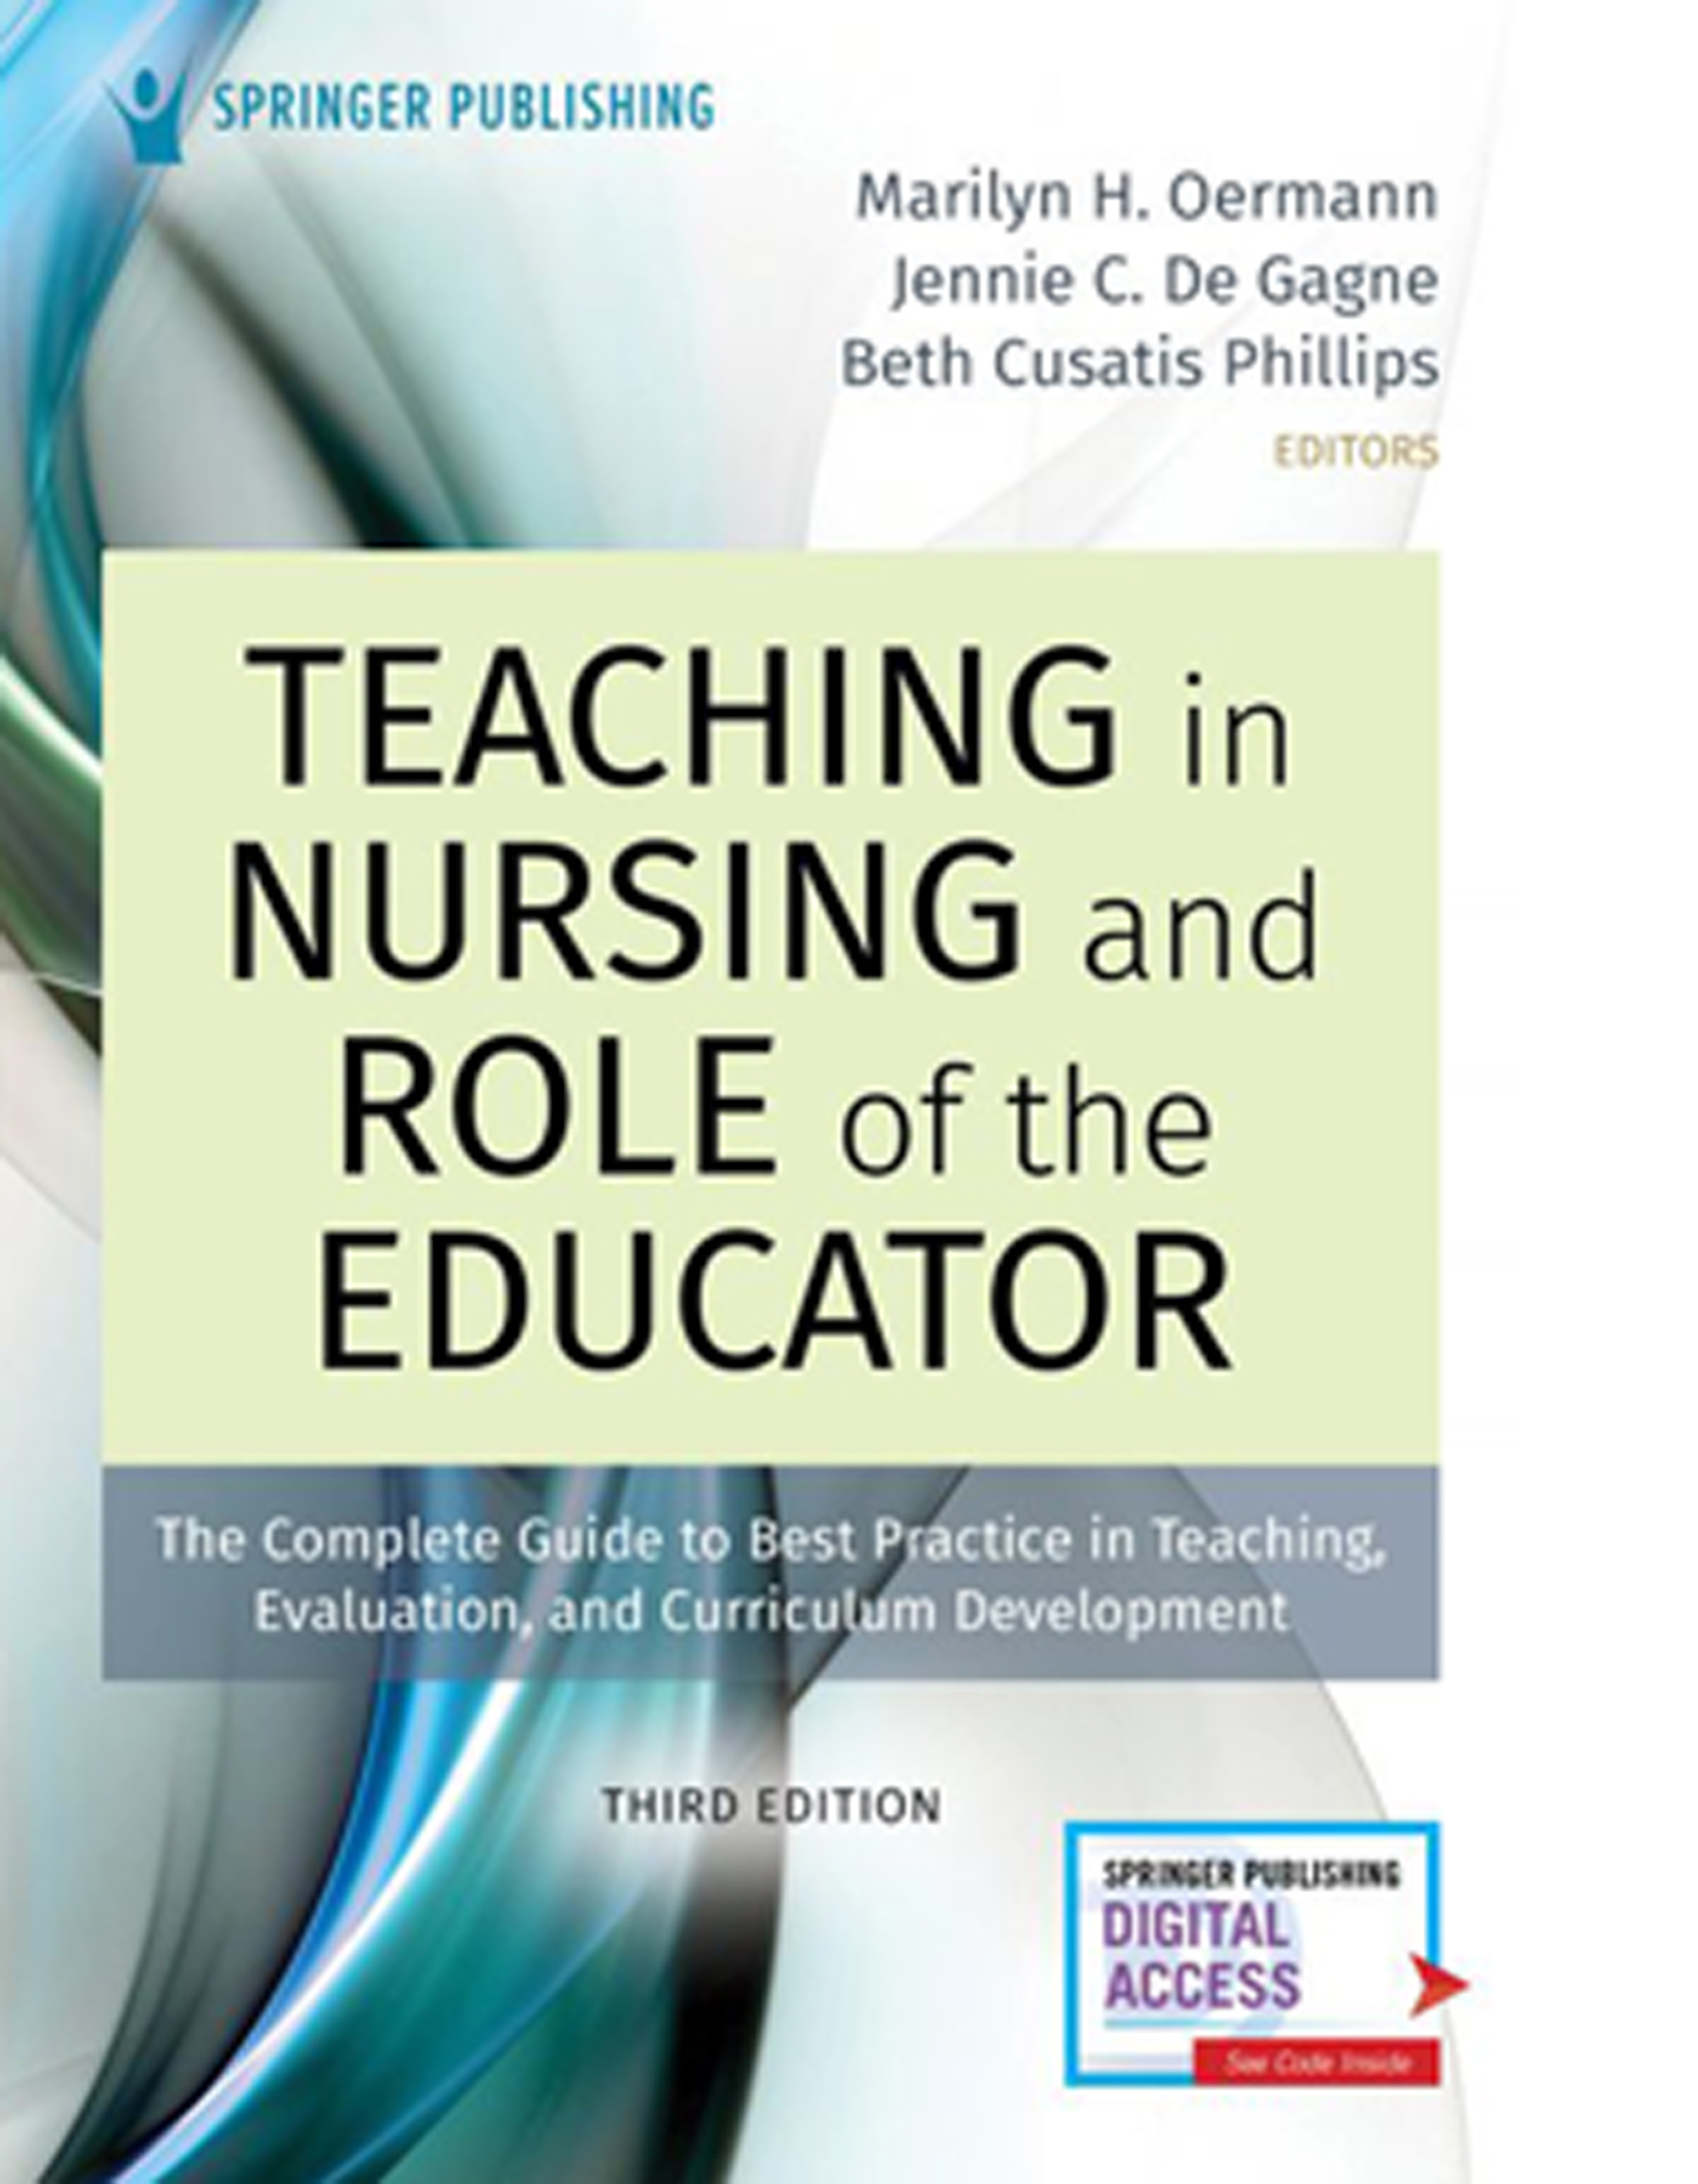 Teaching in Nursing and Role of the Educator, 3rd Ed.